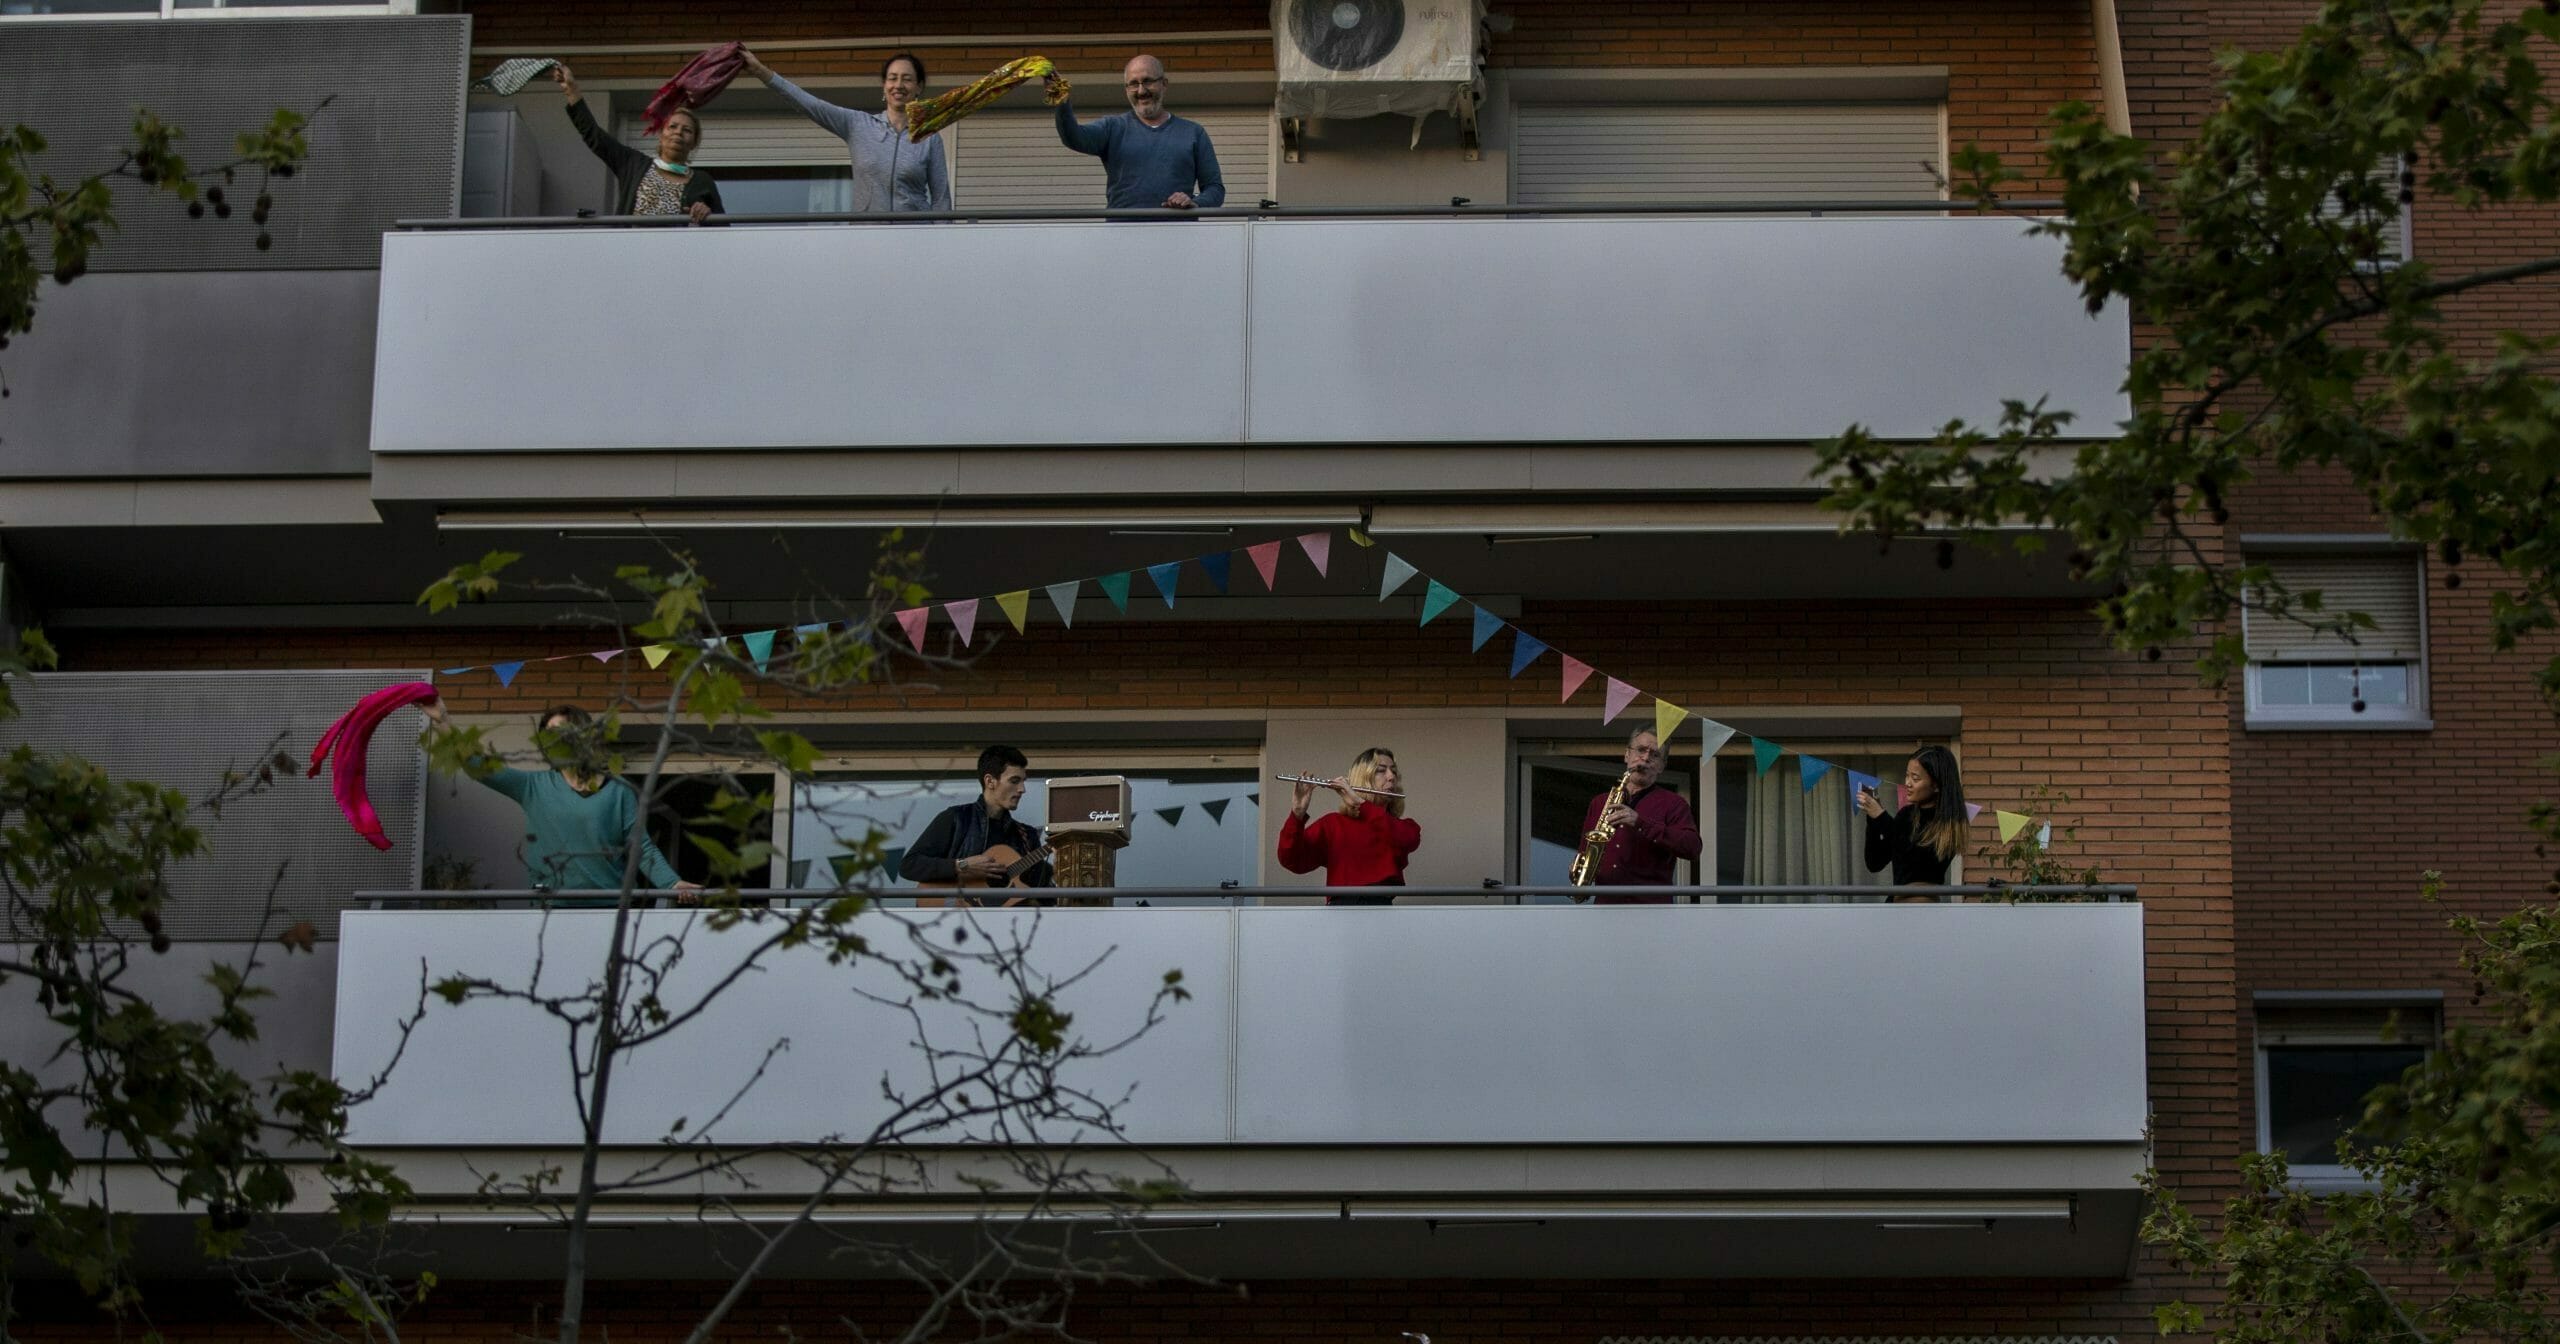 People play instruments as others dance on their balconies in support of the medical staff that are working on the COVID-19 virus outbreak in Barcelona, Spain, on April 5, 2020.